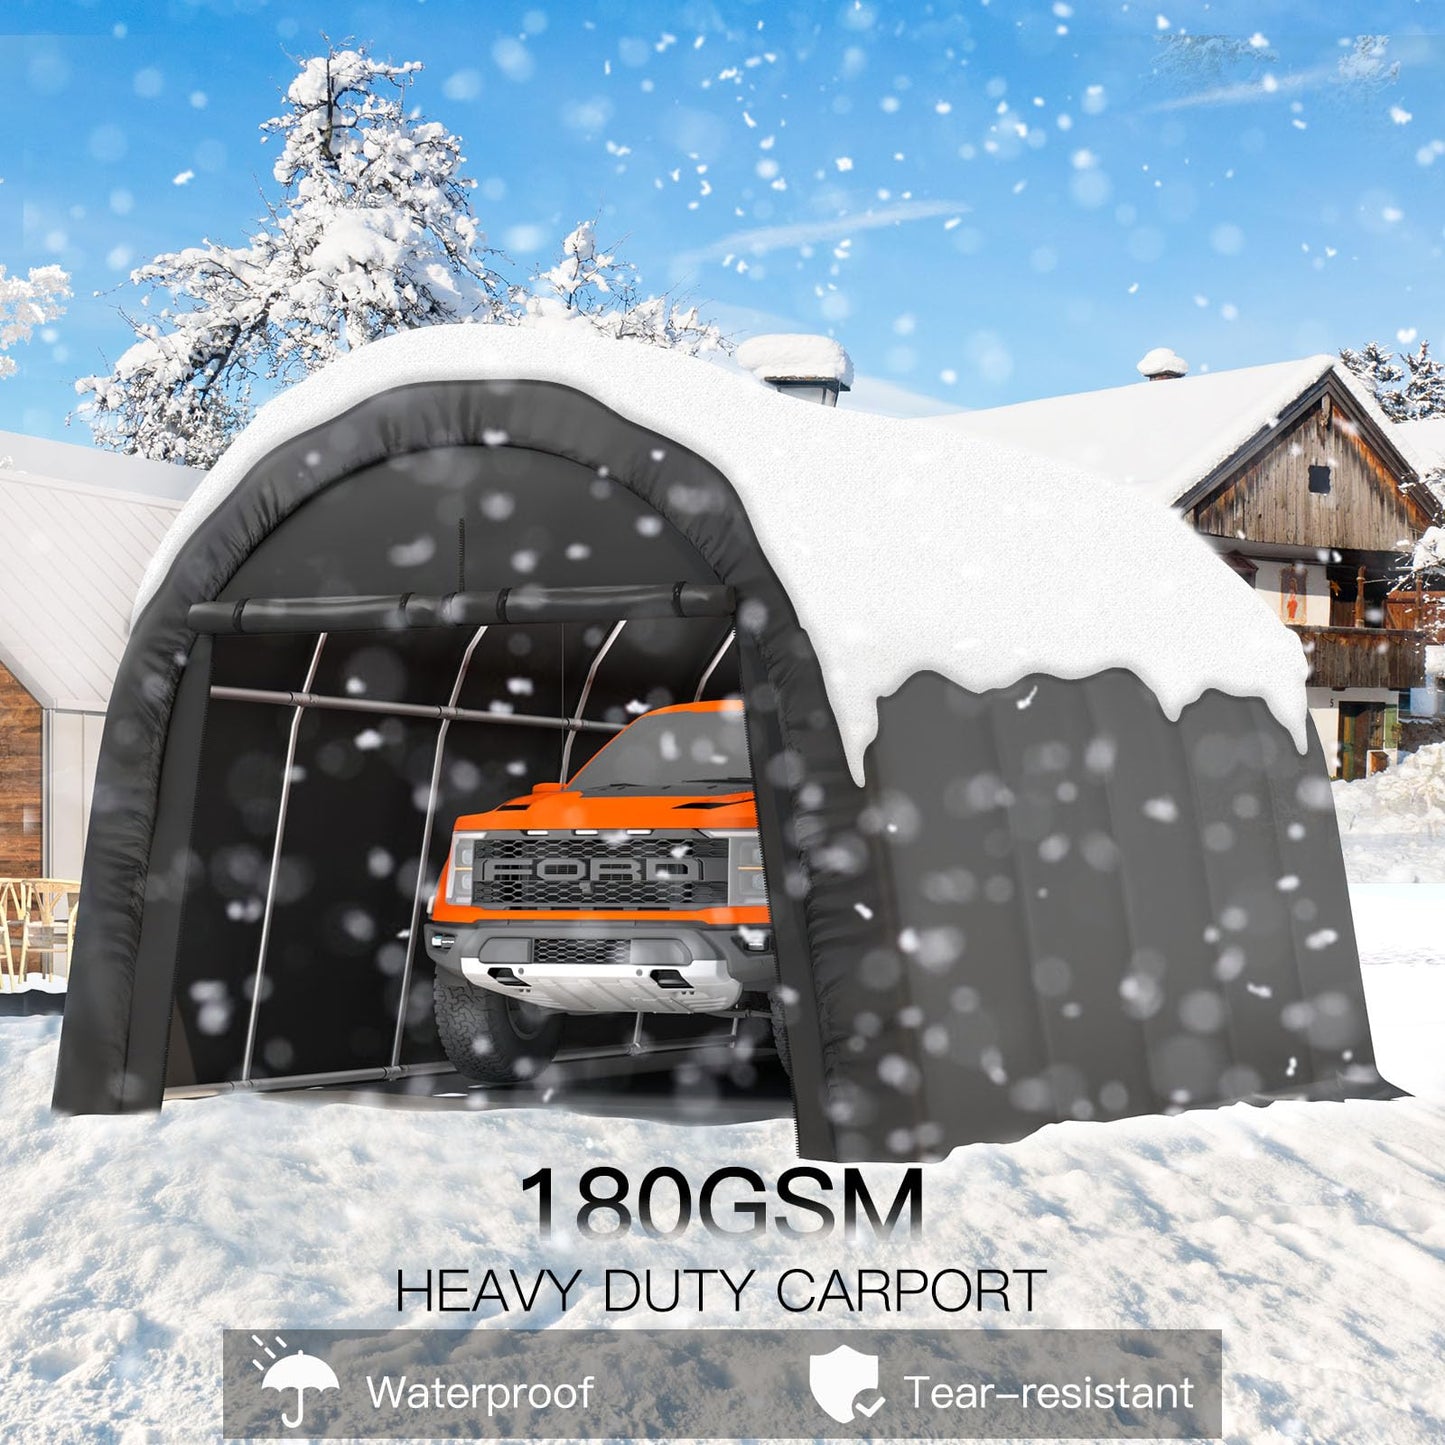 MELLCOM Portable Garage, 12' x 20' x 9.8' Heavy Duty Carport with All-Steel Metal Frame and Round Style Roof, Anti-Snow Car Canopy for Car, Truck,